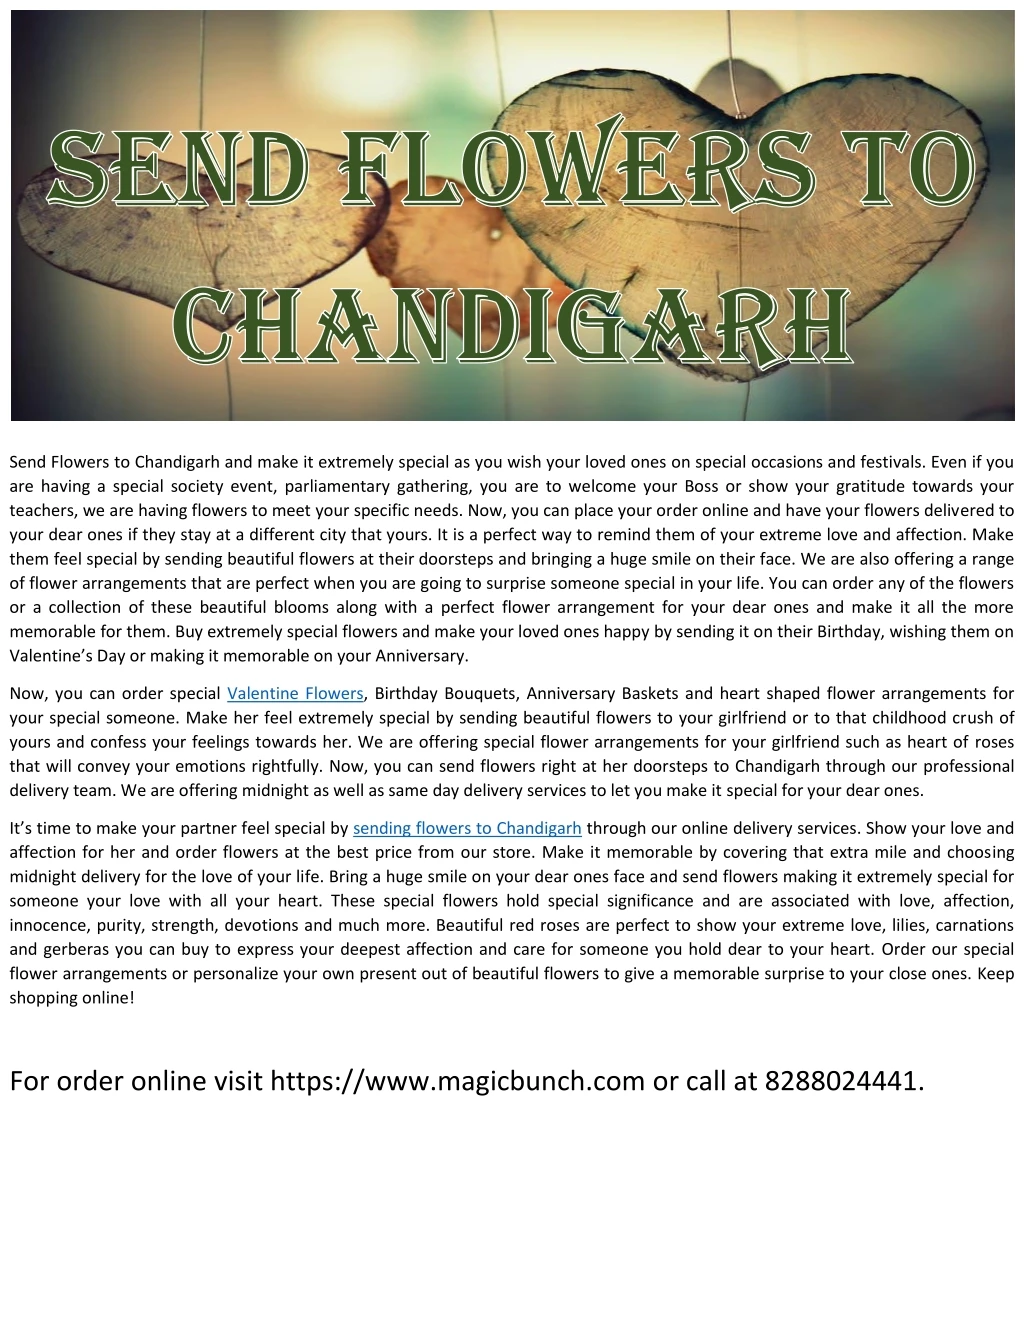 send flowers to chandigarh and make it extremely